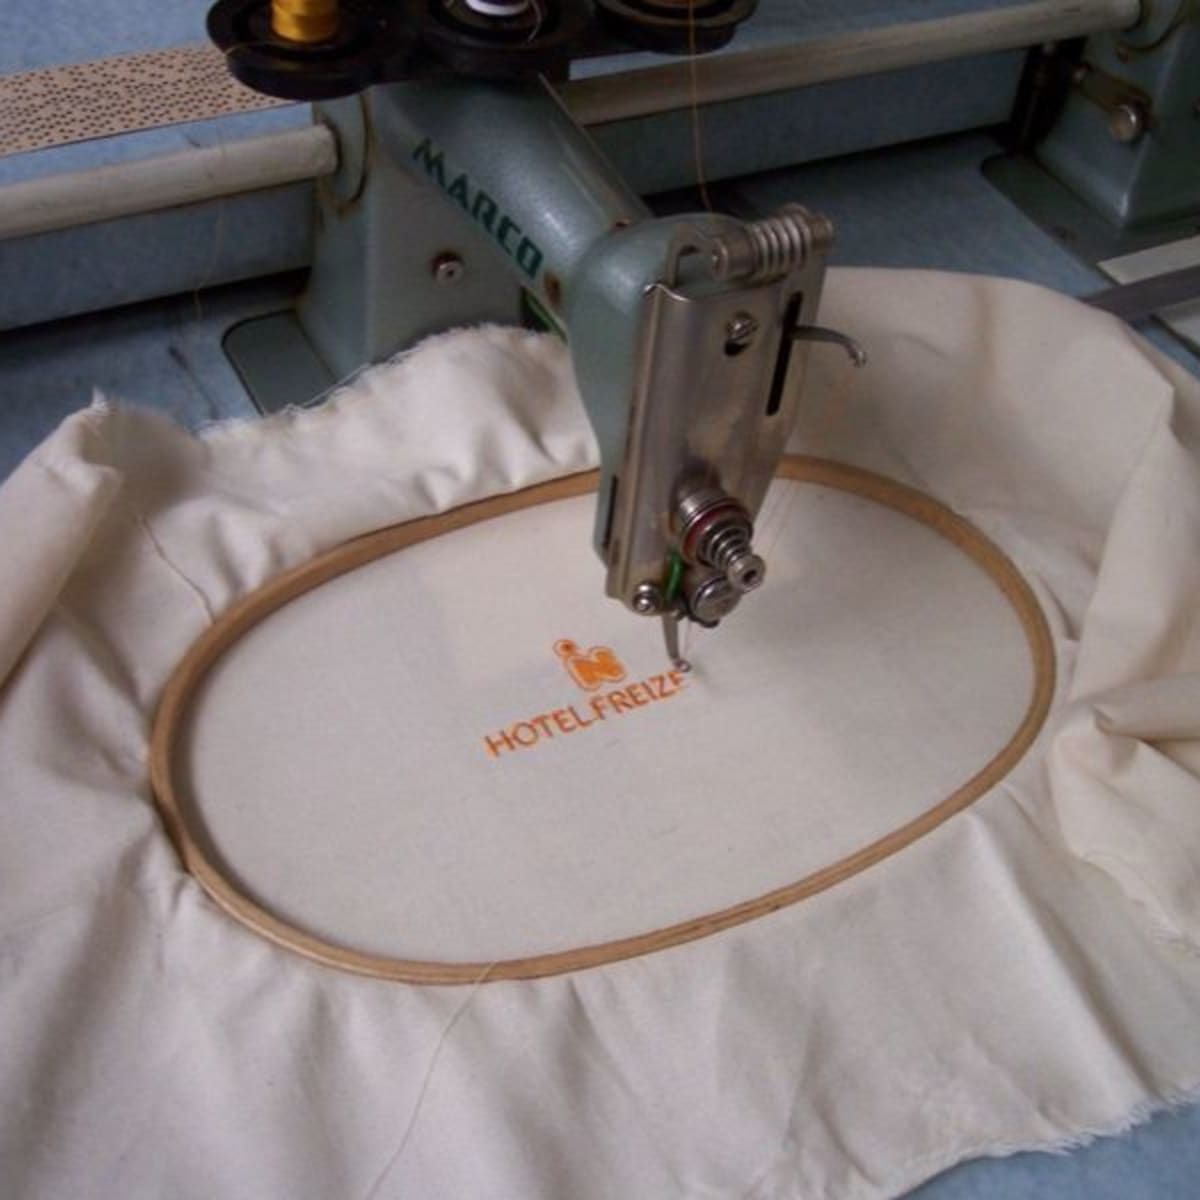 5 Tips for Embroidery Sewing Using a Regular Sewing Machine - FeltMagnet